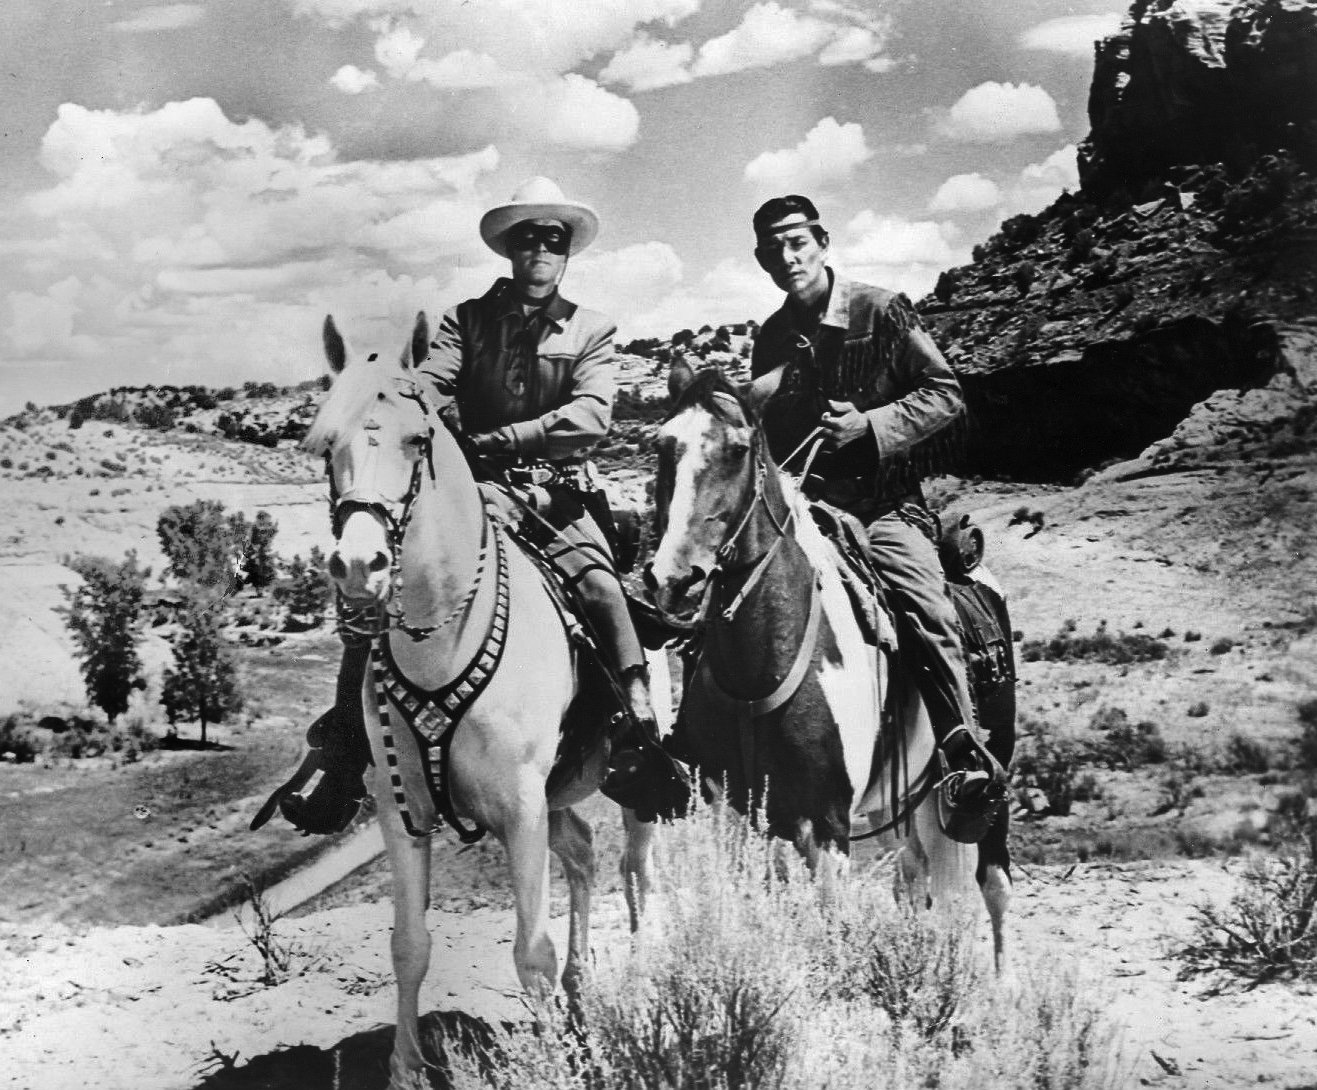 Clayton Moore as the "Lone Ranger" and Jay Silverheels as Tonto in 1956. | Source: Wikimedia Commons.